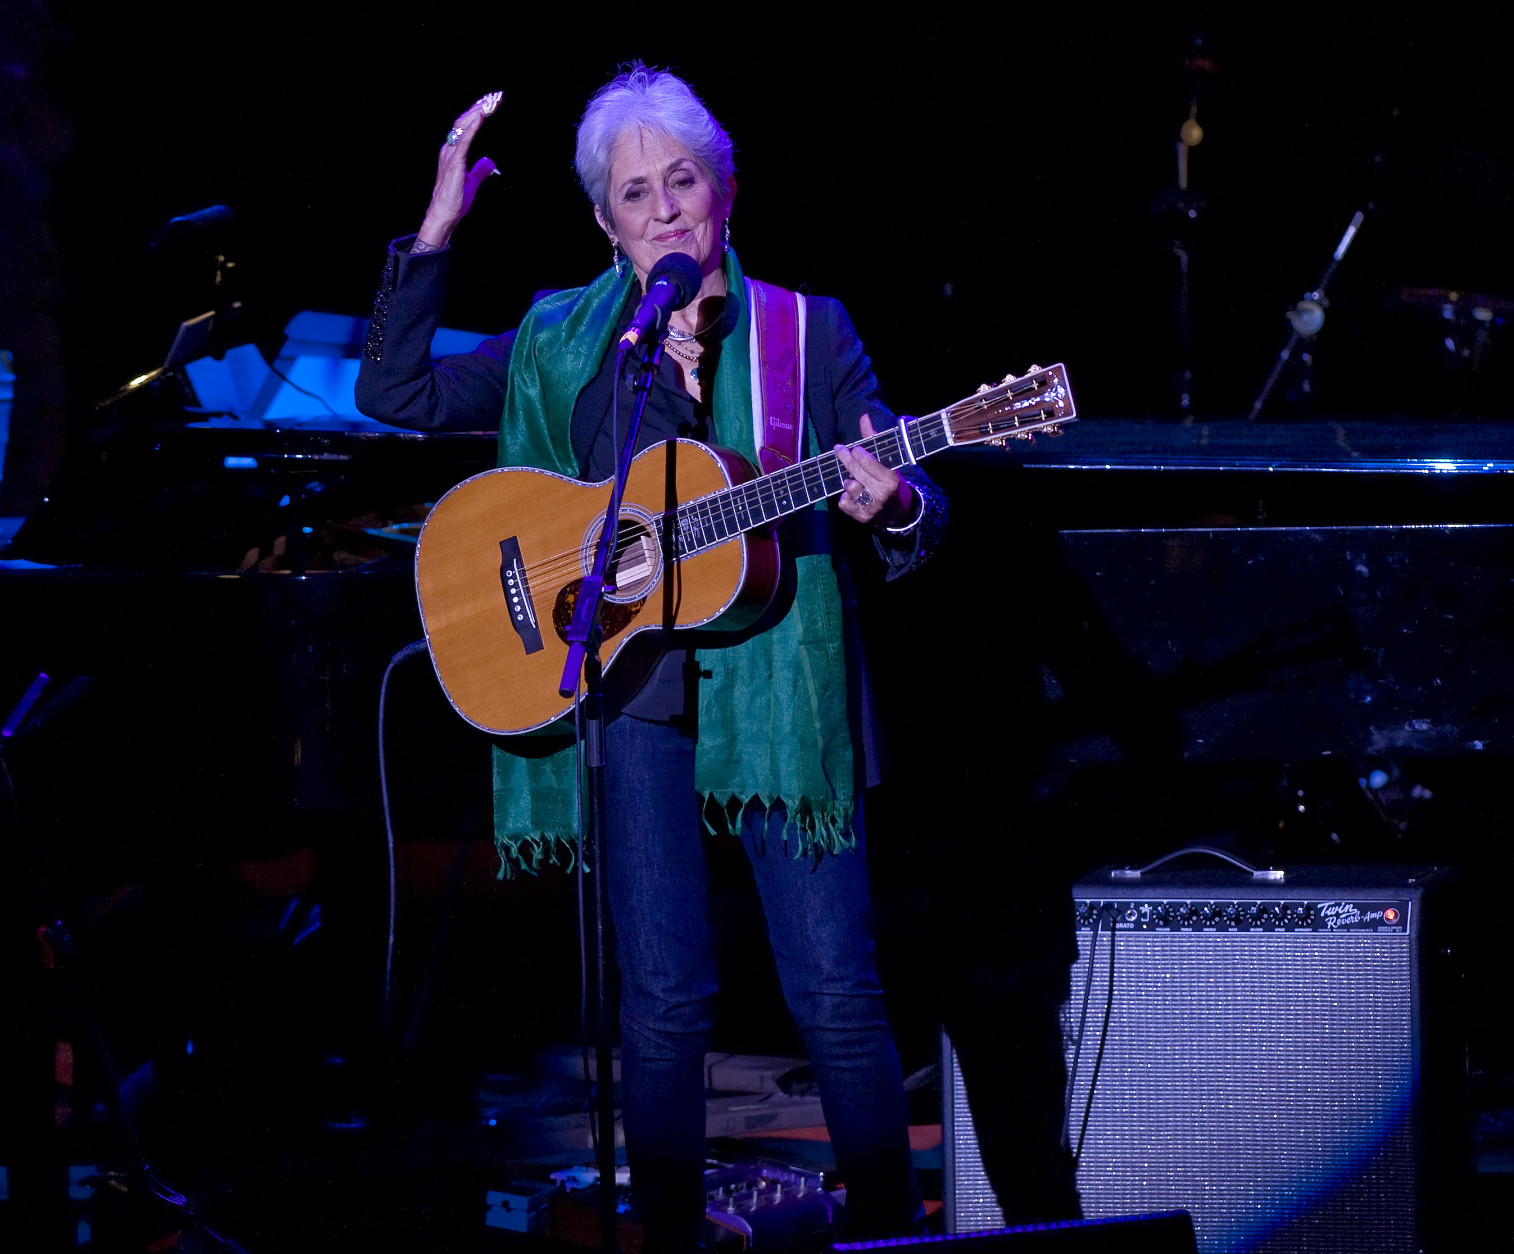 Joan Baez performs at the 2014 ASCAP Centennial Awards, benefiting the ASCAP Foundation and its music education, talent development and humanitarian activities, at the Waldorf-Astoria on Monday, Nov. 17, 2014, in New York. (Photo by Stephen Chernin/Invision/AP)